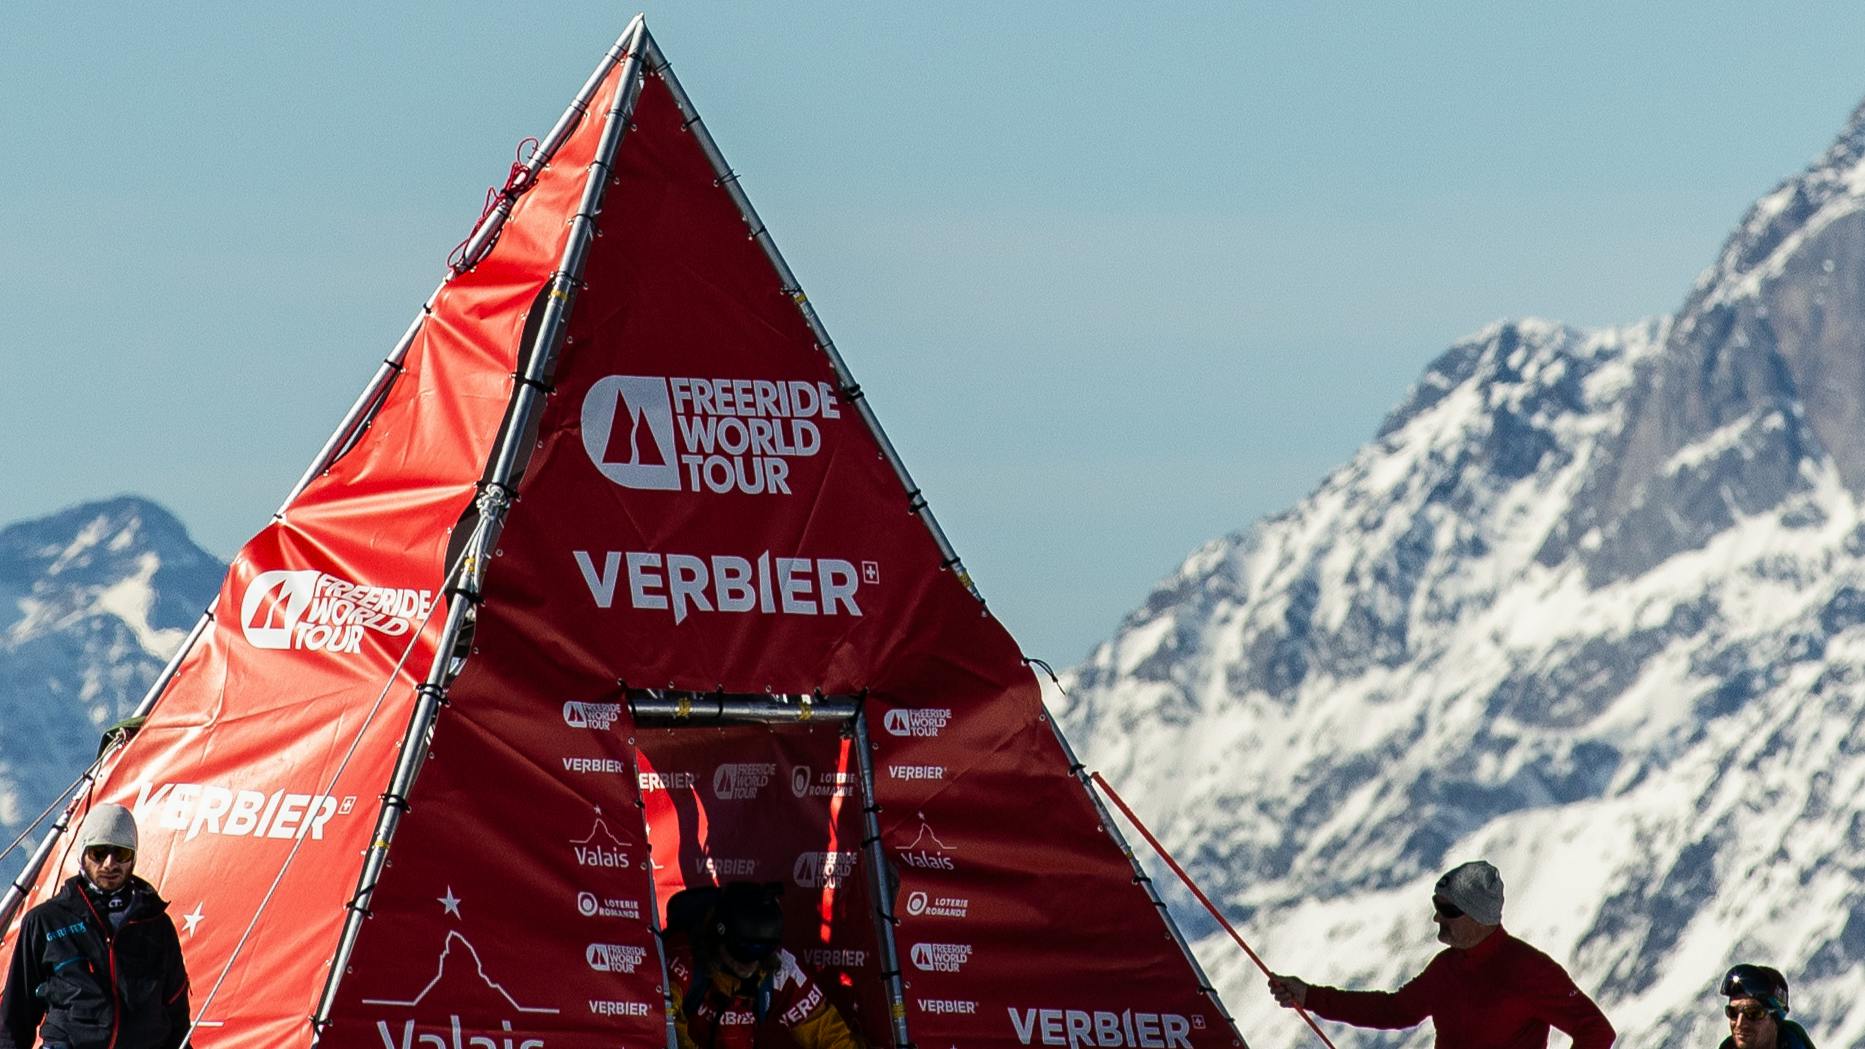 The red tent at the top of Verbier set up for the Freeride World Tour.